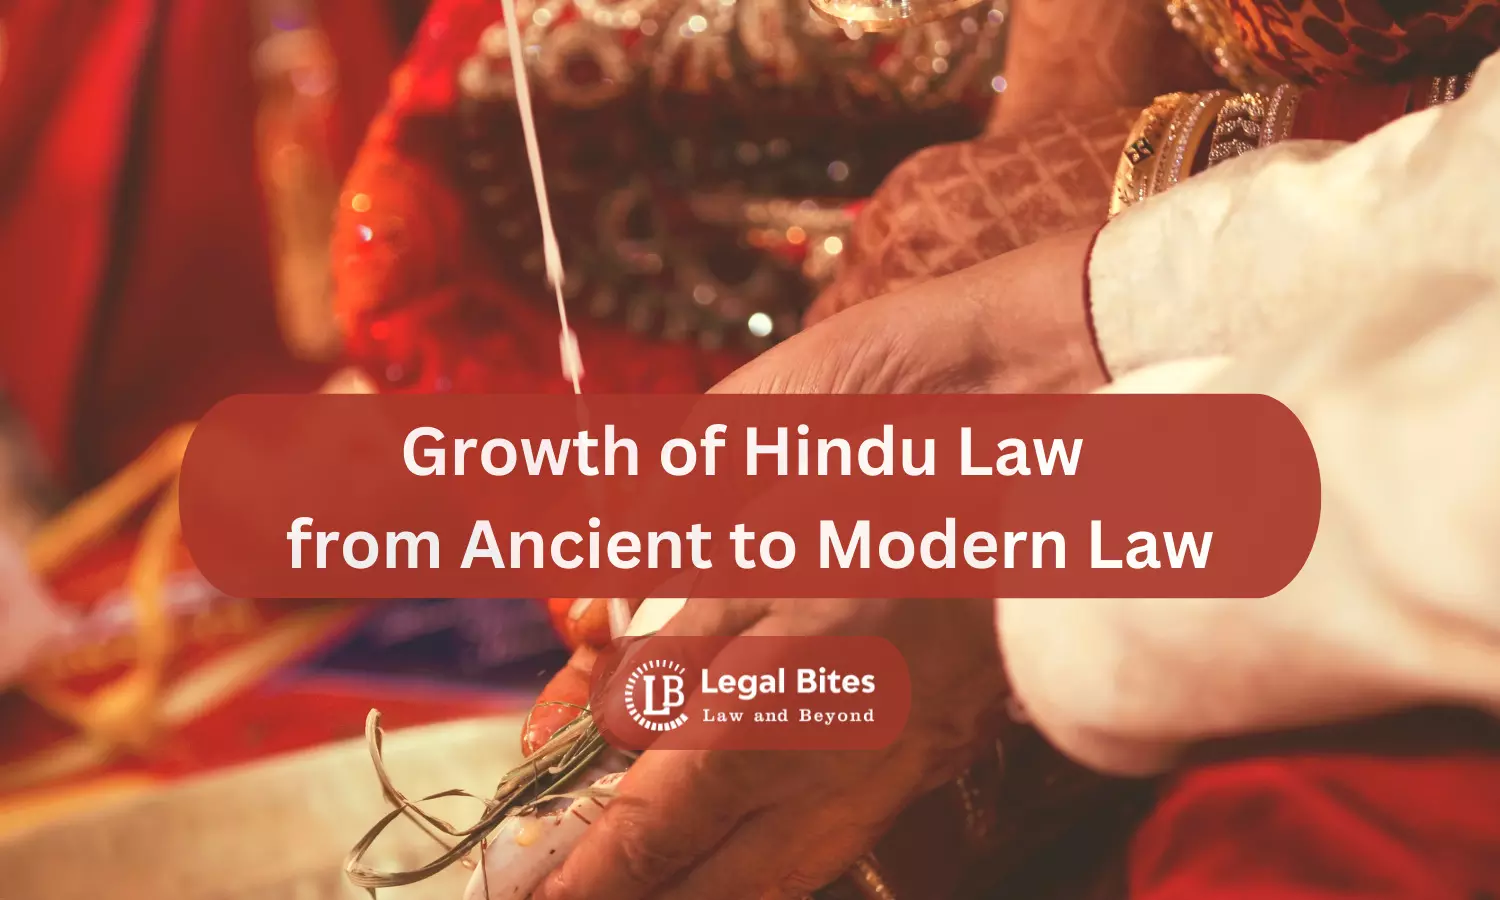 Growth of Hindu Law from Ancient to Modern Law